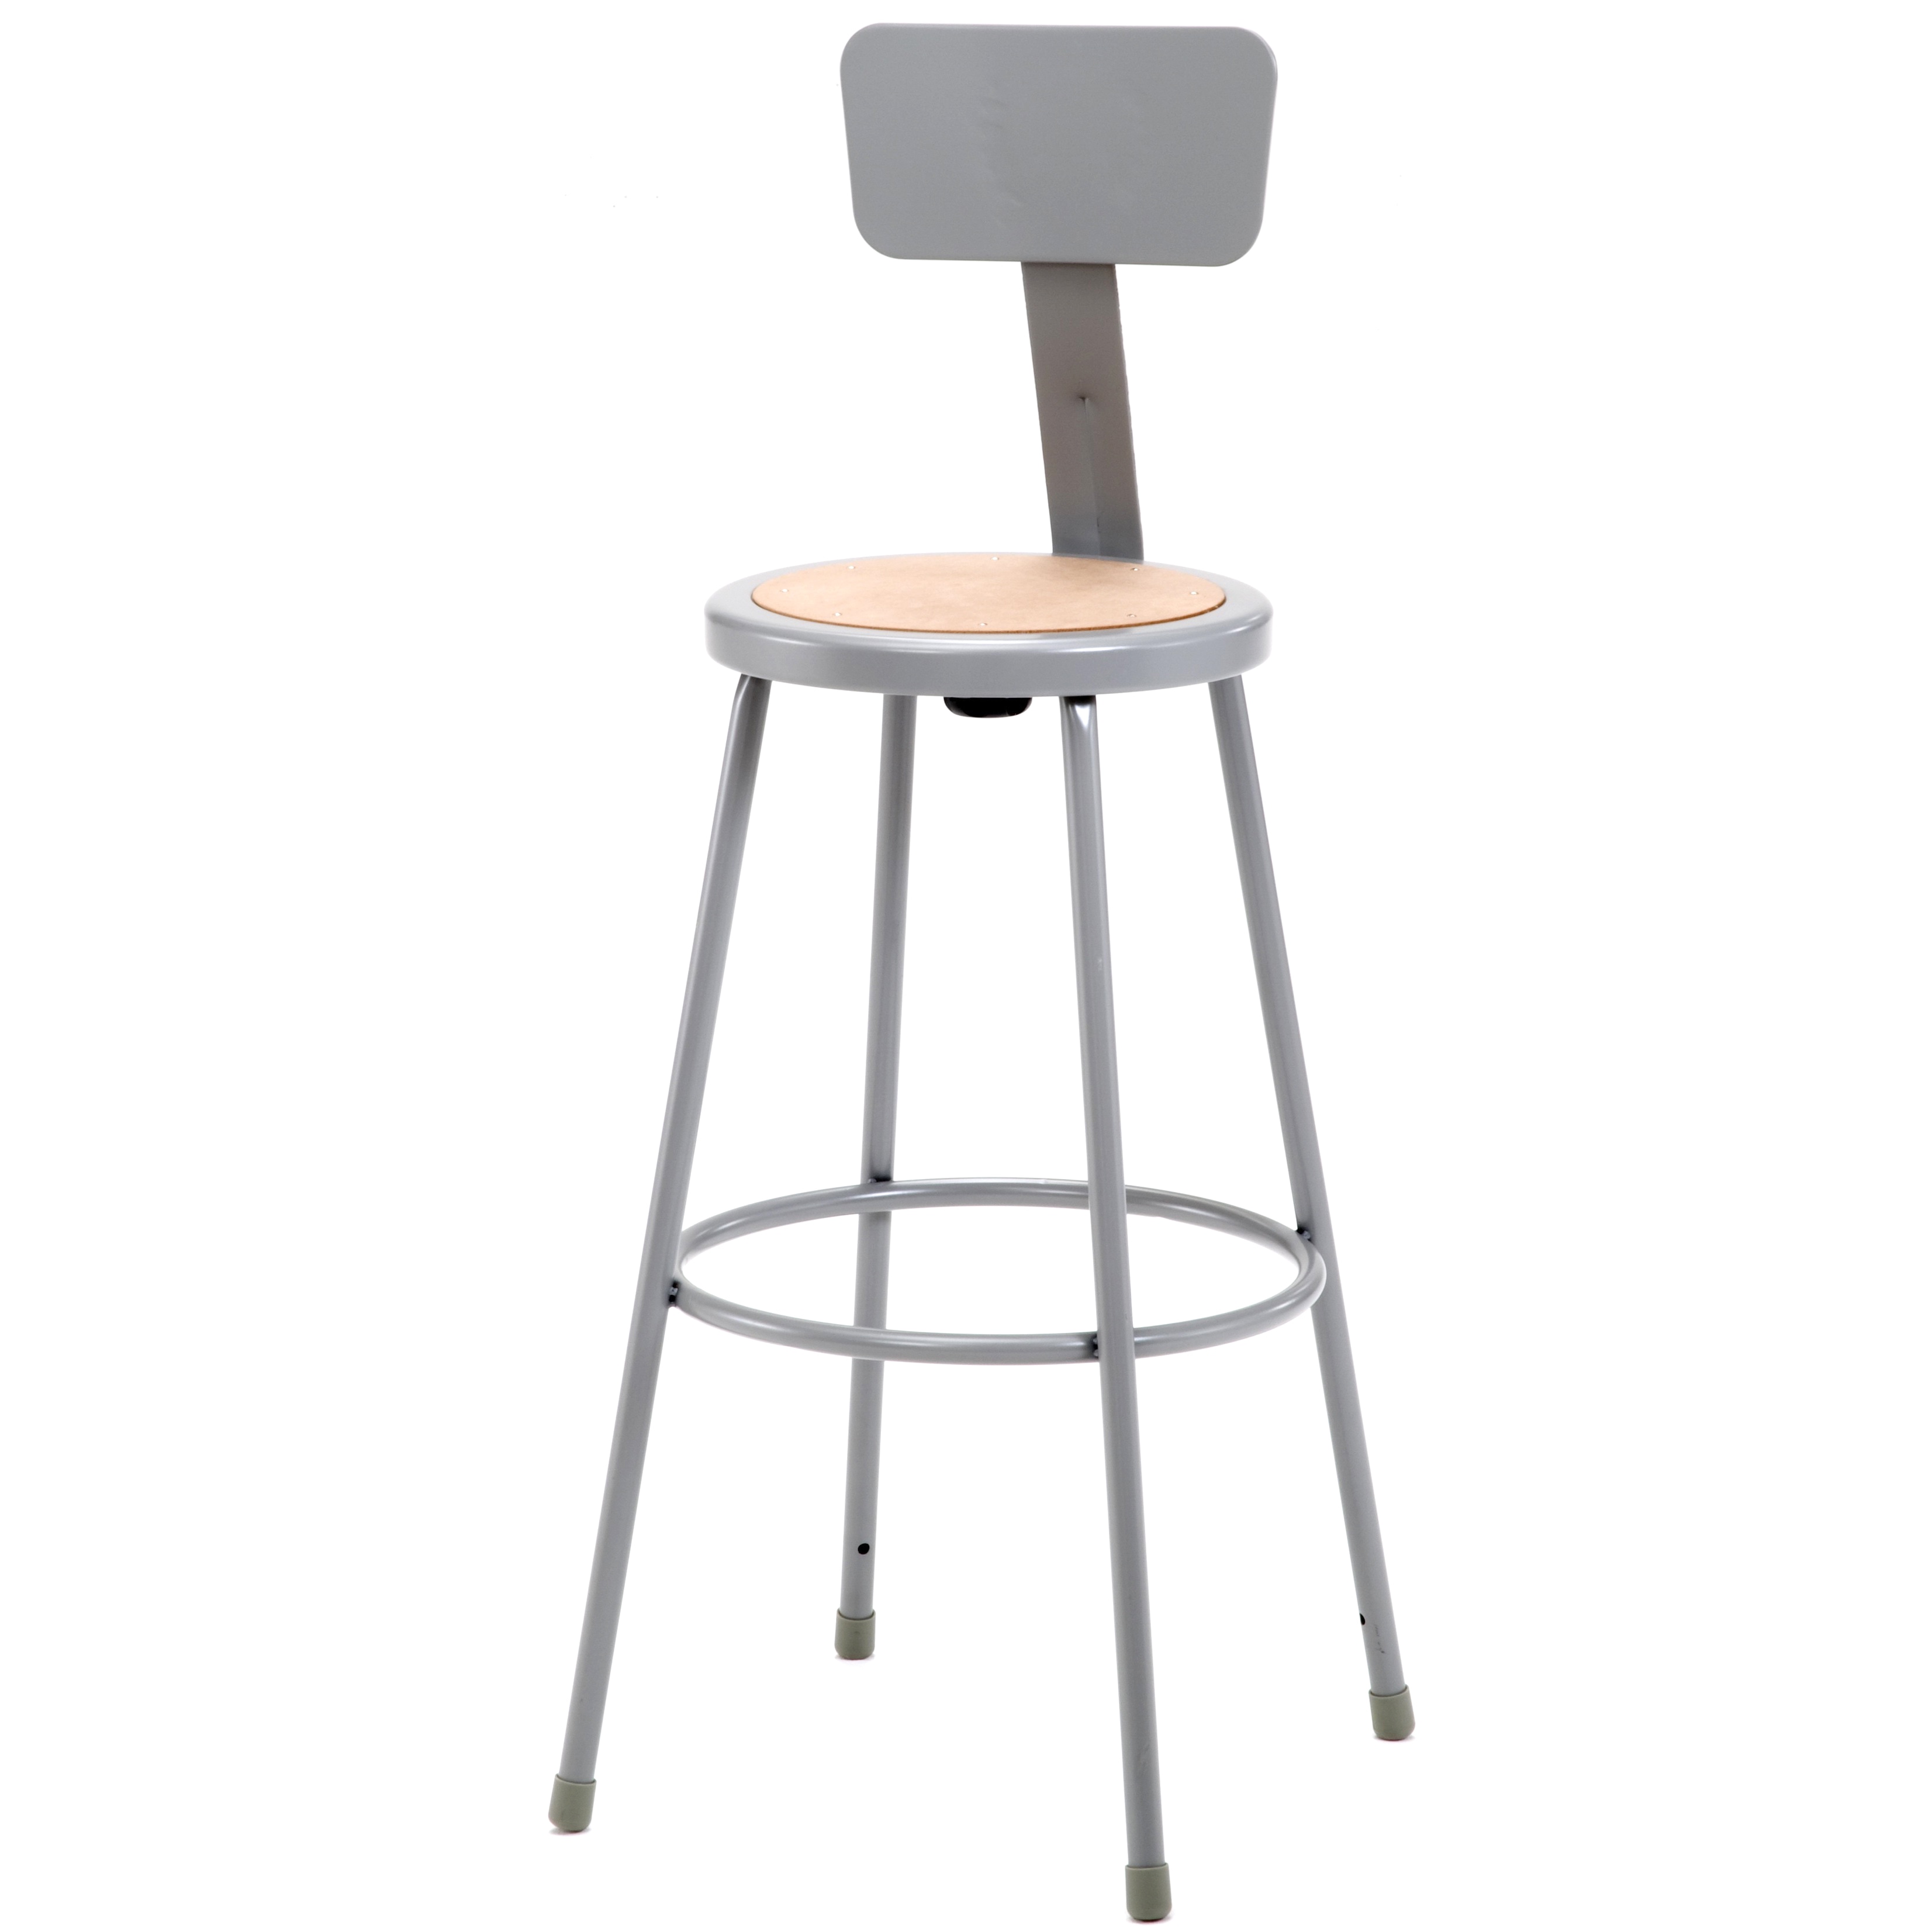 stools 18 inches high